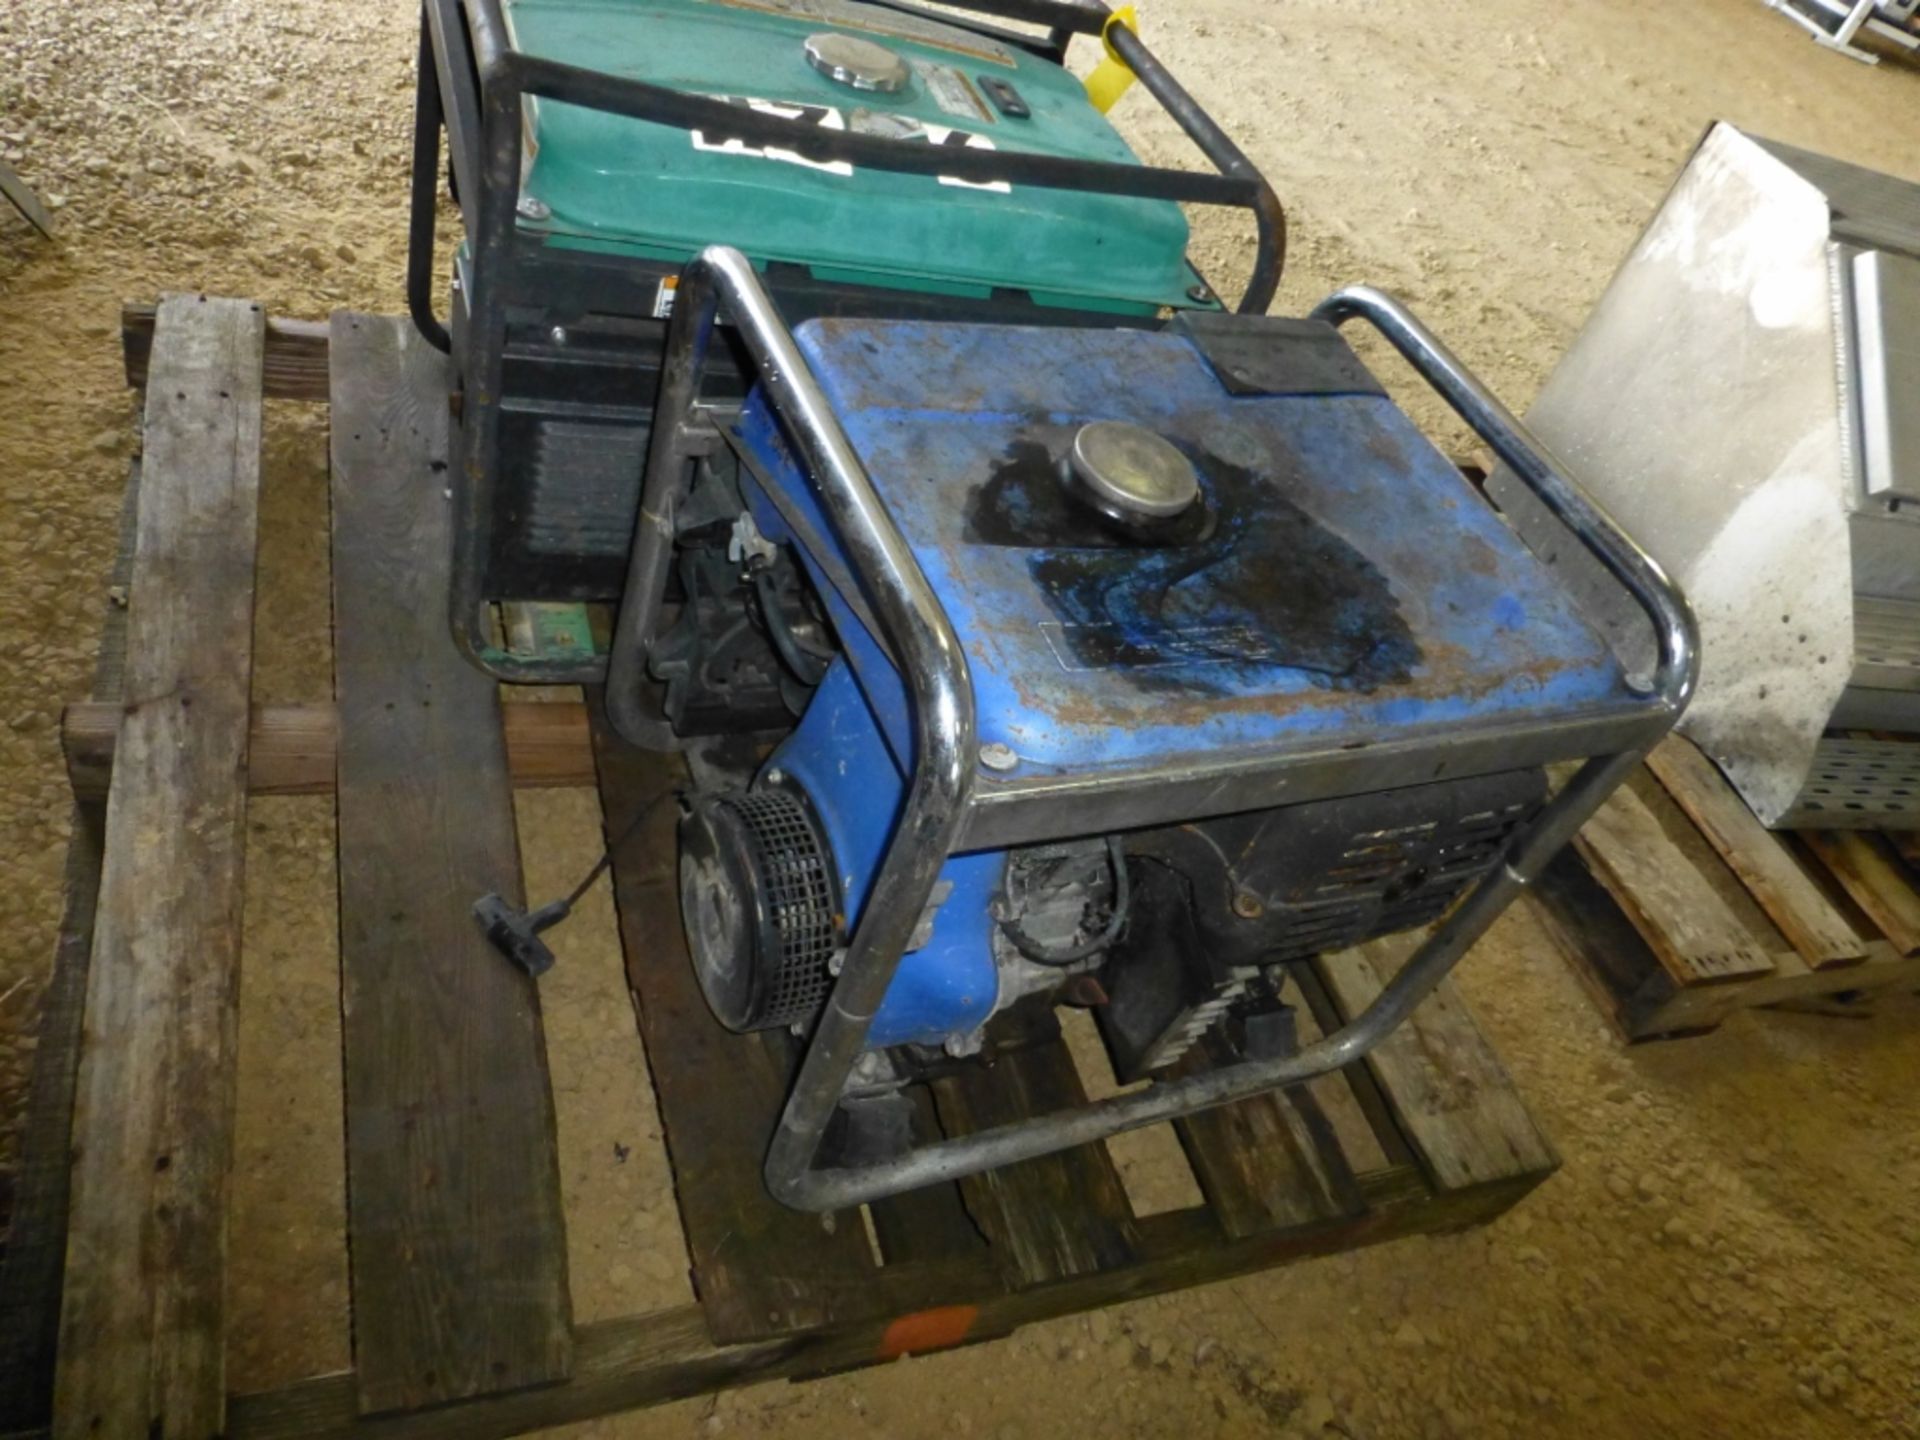 Homesite power 6500 generator, missing recoil, with blue generator, unknown working condition - Image 5 of 5